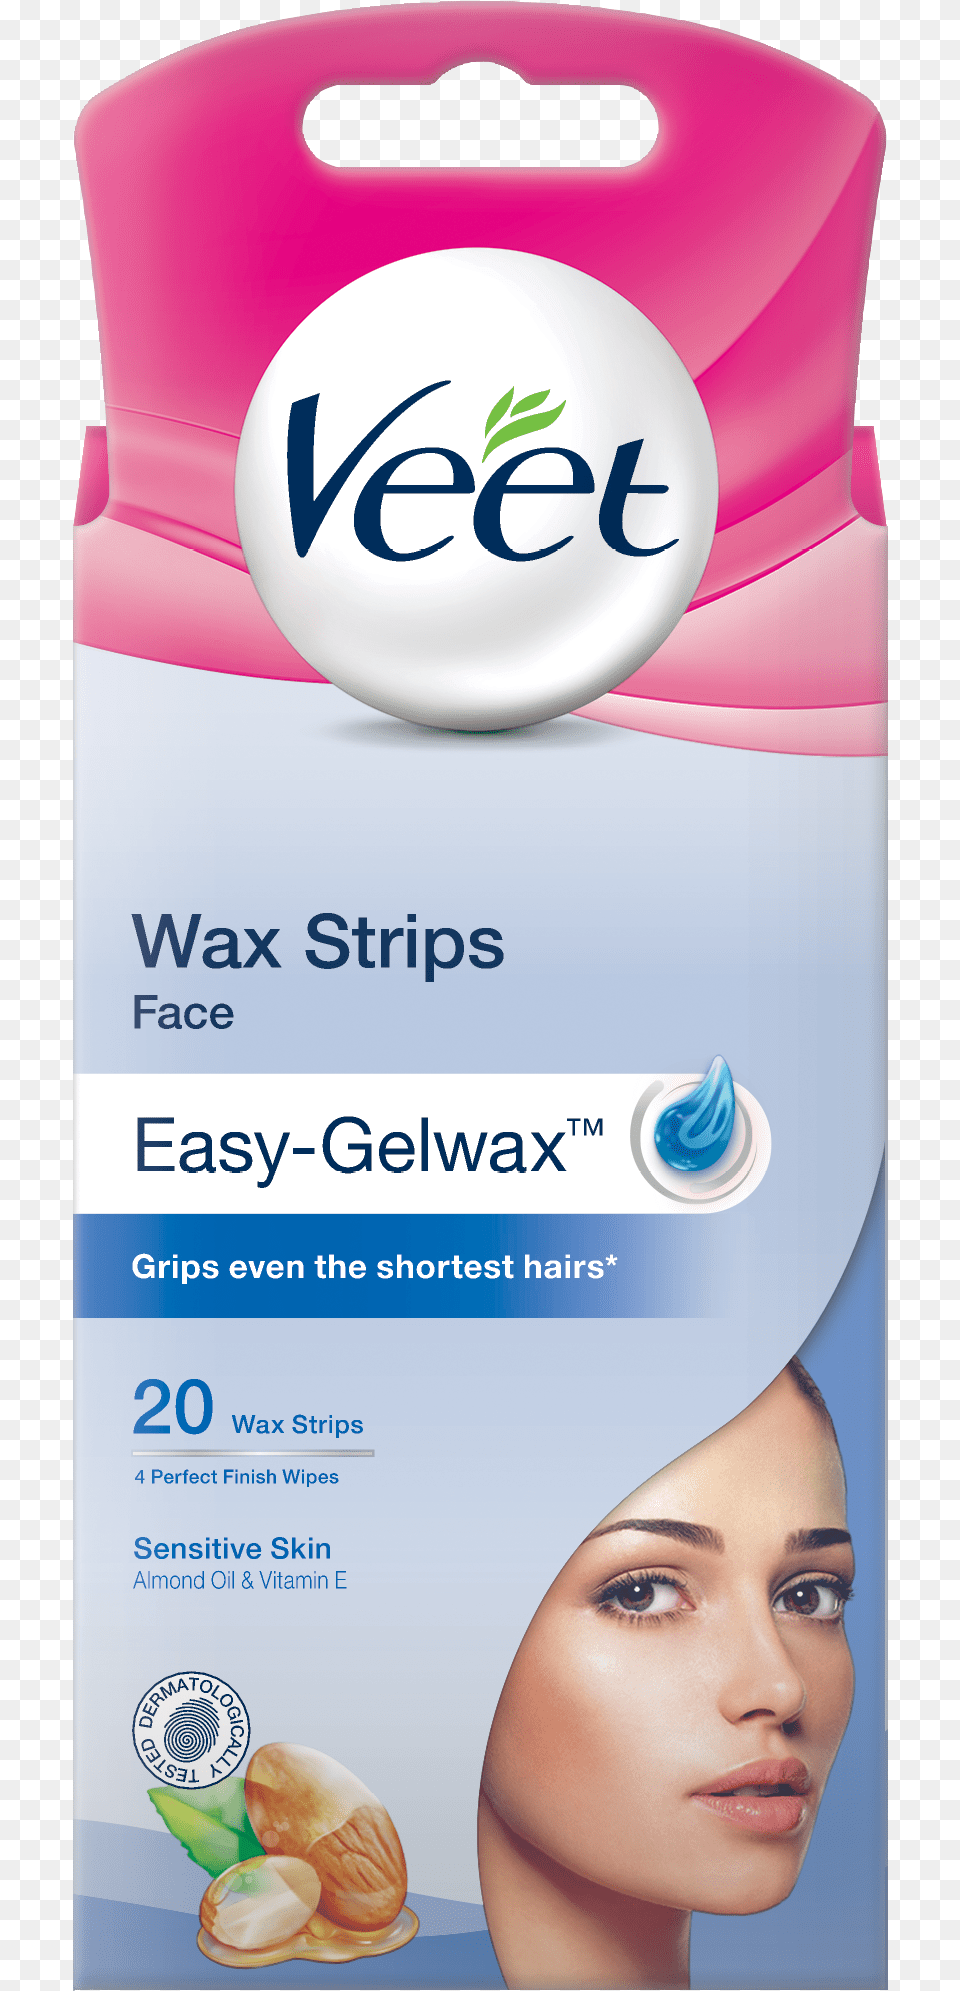 Veet Wax Strips For Face Sensitive Skin 20s Veet Easy Gel Wax For Face, Adult, Female, Person, Woman Png Image